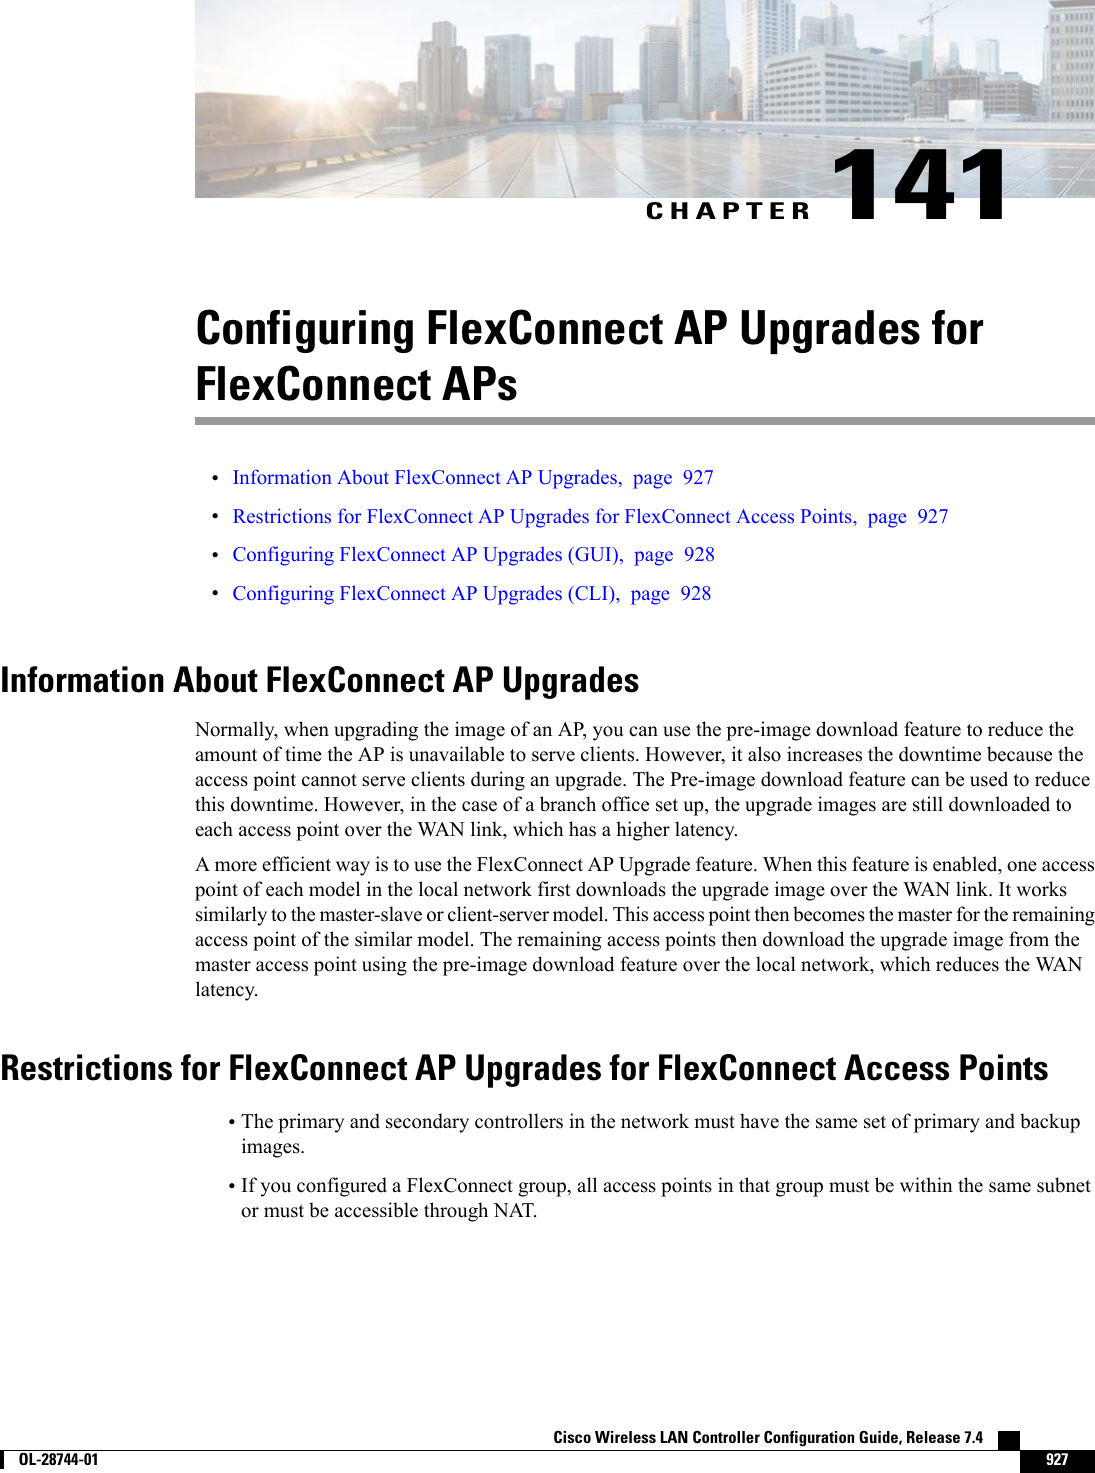 CHAPTER 141Configuring FlexConnect AP Upgrades forFlexConnect APs•Information About FlexConnect AP Upgrades, page 927•Restrictions for FlexConnect AP Upgrades for FlexConnect Access Points, page 927•Configuring FlexConnect AP Upgrades (GUI), page 928•Configuring FlexConnect AP Upgrades (CLI), page 928Information About FlexConnect AP UpgradesNormally, when upgrading the image of an AP, you can use the pre-image download feature to reduce theamount of time the AP is unavailable to serve clients. However, it also increases the downtime because theaccess point cannot serve clients during an upgrade. The Pre-image download feature can be used to reducethis downtime. However, in the case of a branch office set up, the upgrade images are still downloaded toeach access point over the WAN link, which has a higher latency.A more efficient way is to use the FlexConnect AP Upgrade feature. When this feature is enabled, one accesspoint of each model in the local network first downloads the upgrade image over the WAN link. It workssimilarly to the master-slave or client-server model. This access point then becomes the master for the remainingaccess point of the similar model. The remaining access points then download the upgrade image from themaster access point using the pre-image download feature over the local network, which reduces the WANlatency.Restrictions for FlexConnect AP Upgrades for FlexConnect Access Points•The primary and secondary controllers in the network must have the same set of primary and backupimages.•If you configured a FlexConnect group, all access points in that group must be within the same subnetor must be accessible through NAT.Cisco Wireless LAN Controller Configuration Guide, Release 7.4        OL-28744-01 927